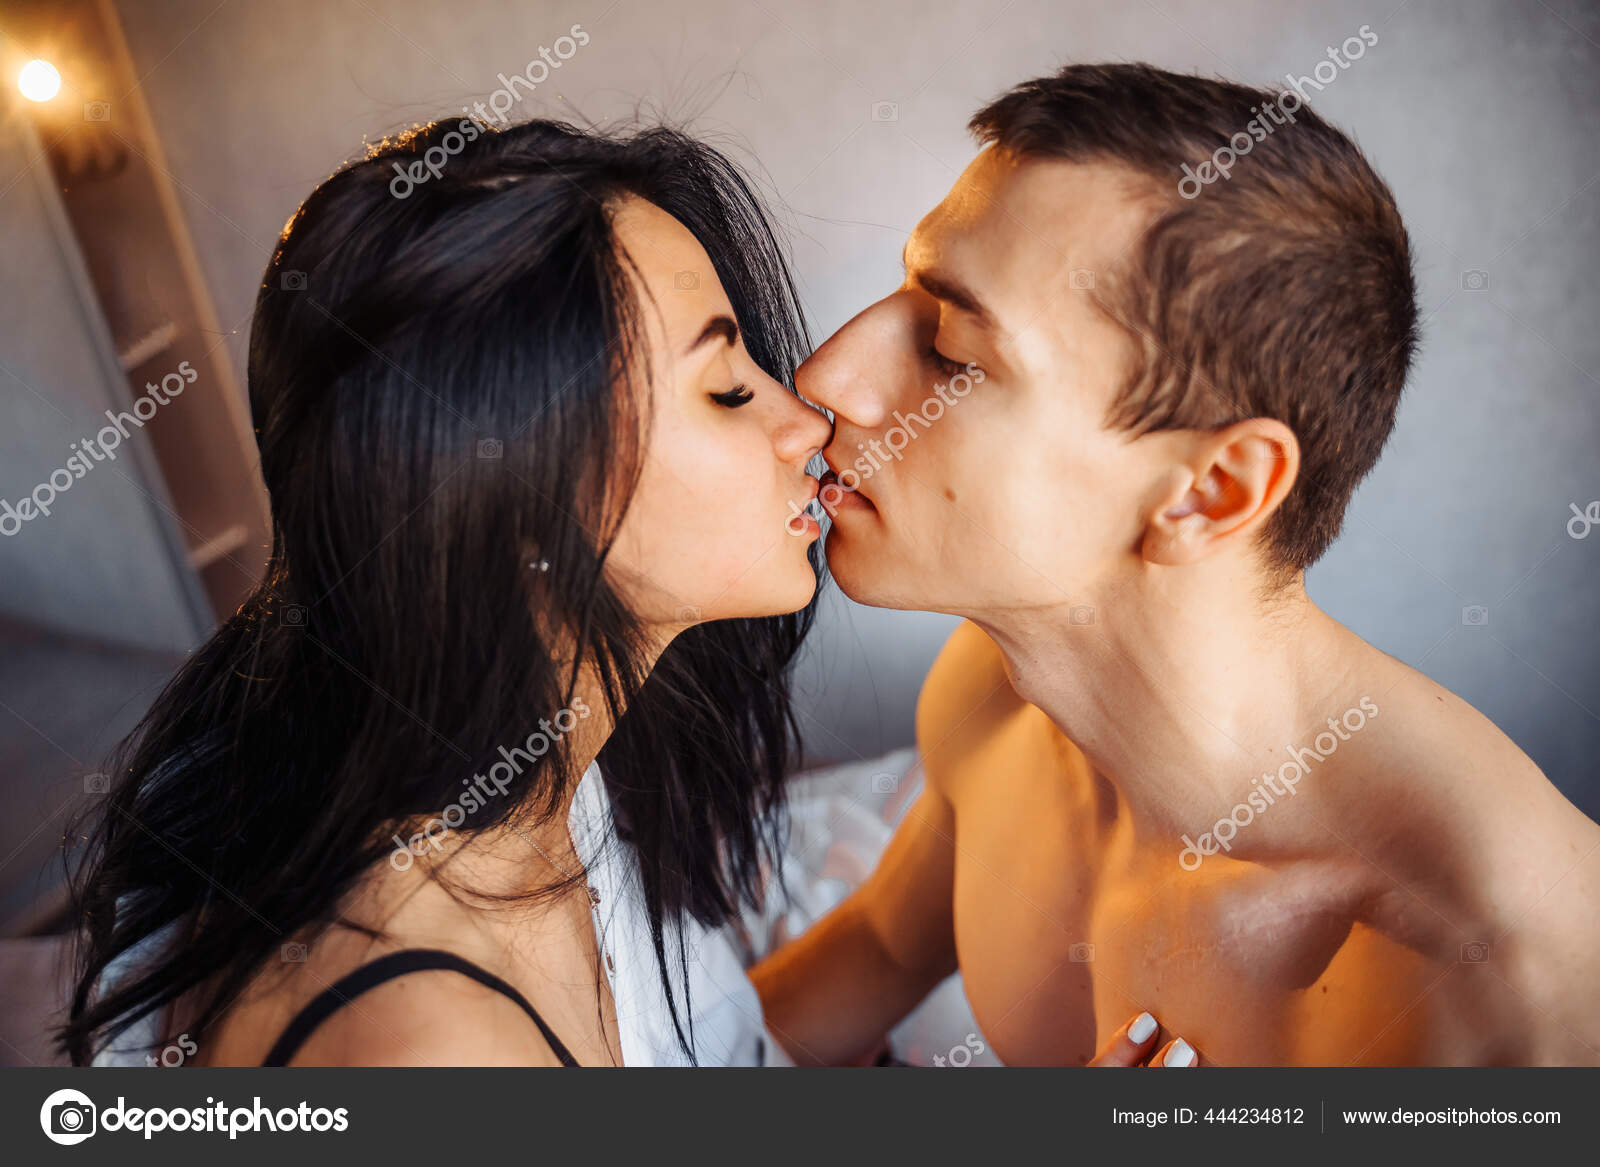 Close Beautiful Nude Couple Two Young People Love Having Sex Stock Photo by ©dariaagaf 444234812